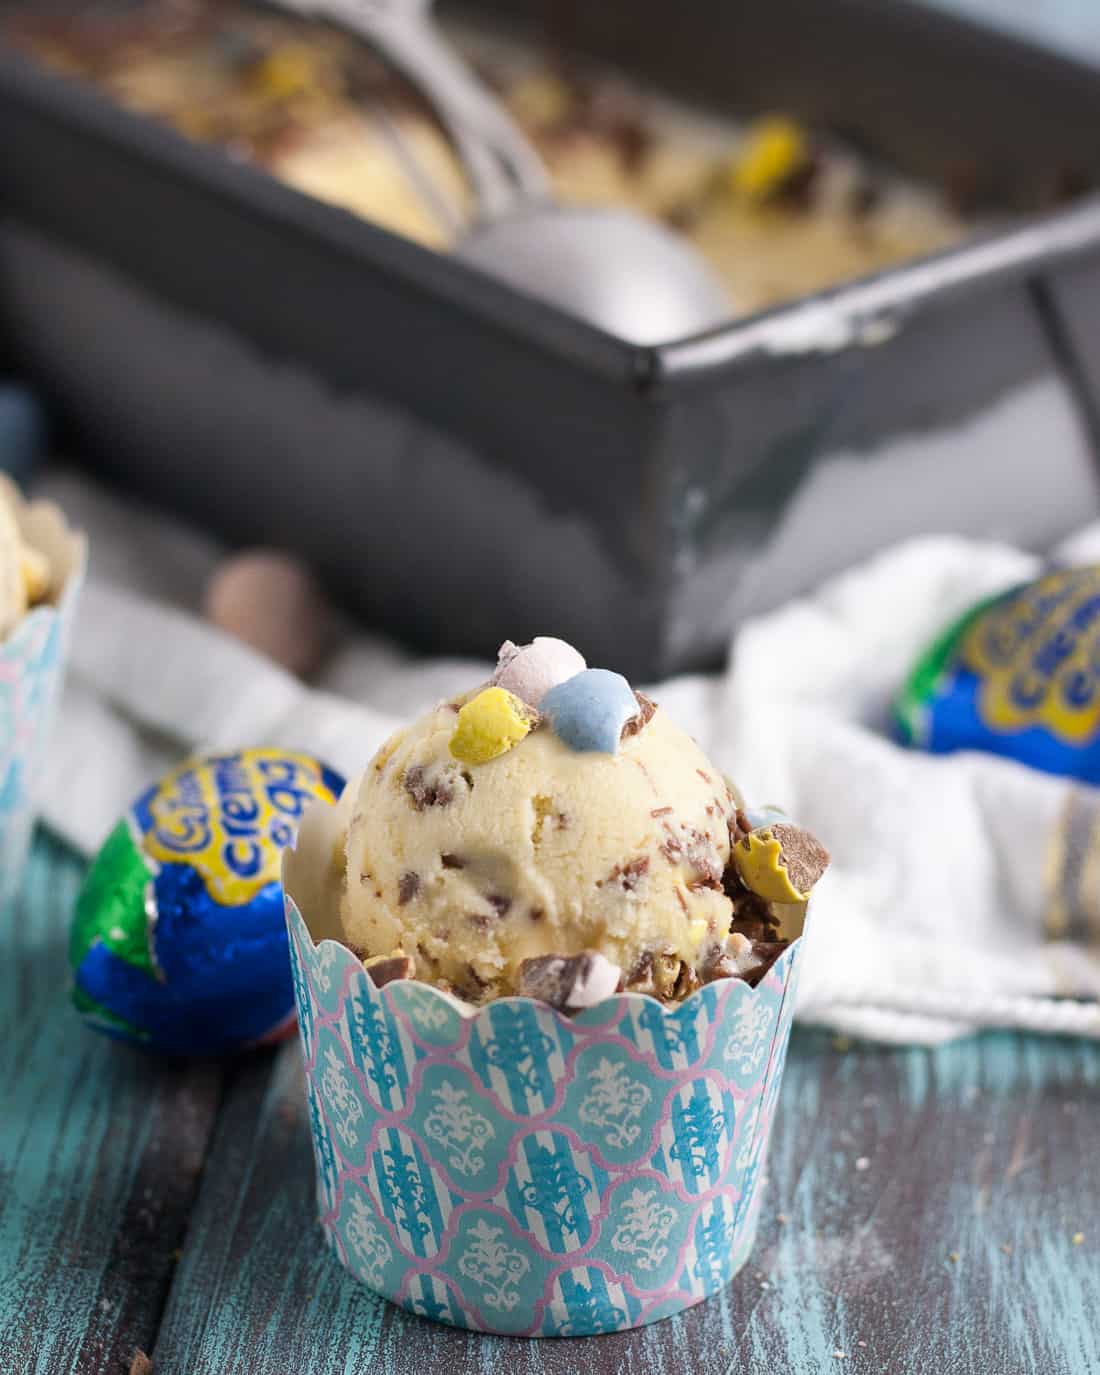 ﻿Homemade gelato is ultra creamy, sweet, and this version is a unique make ahead dessert to serve in springtime! Cadbury creme egg gelato is a great way to use all that Easter chocolate! * Recipe on GoodieGodmother.com